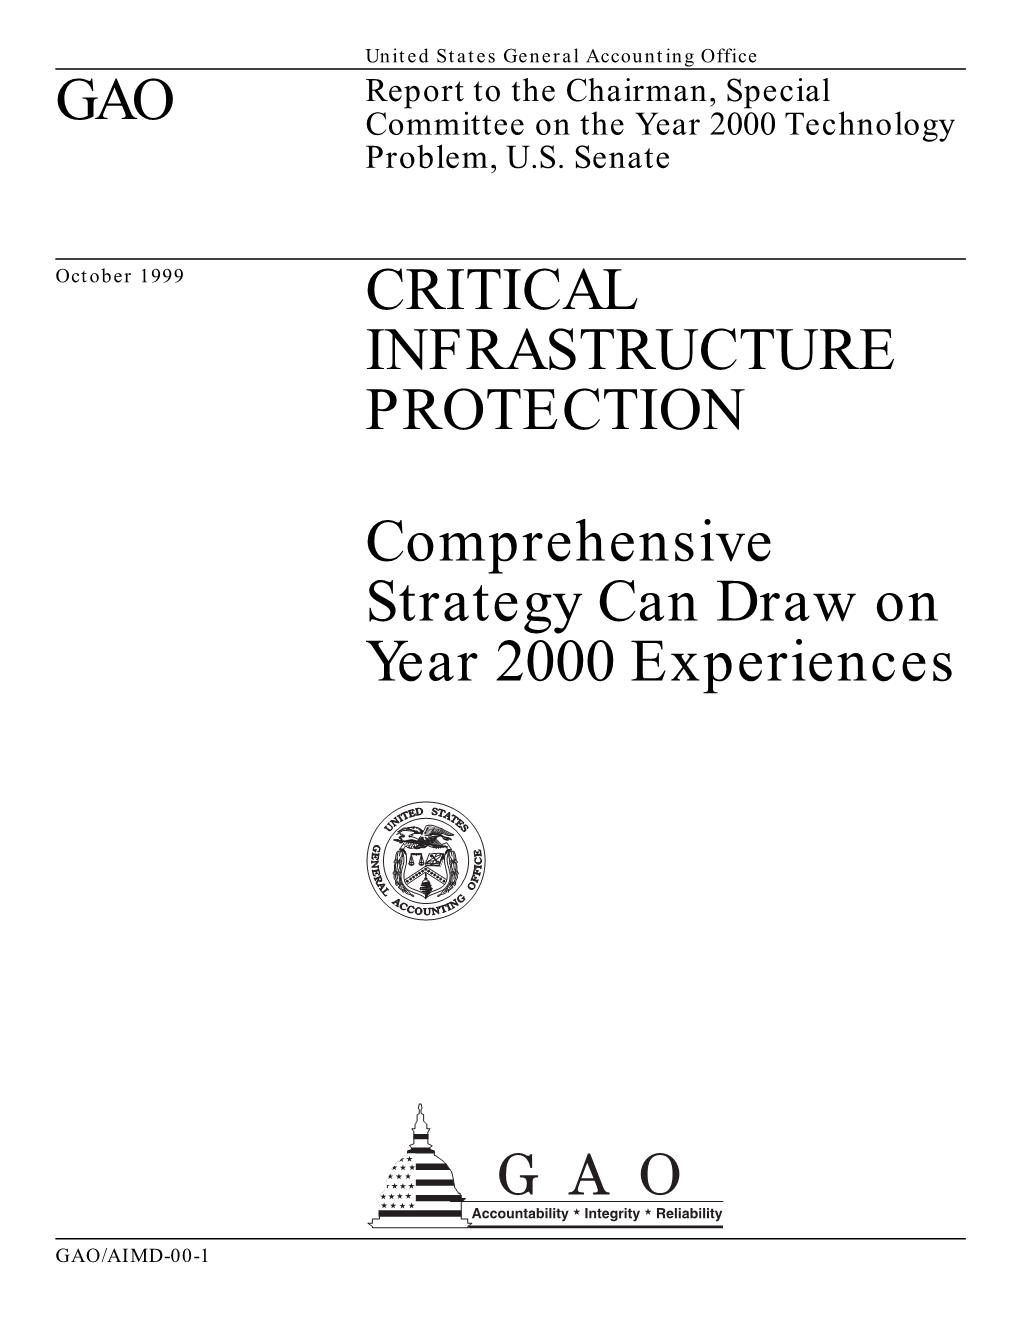 GAO CRITICAL INFRASTRUCTURE PROTECTION Comprehensive